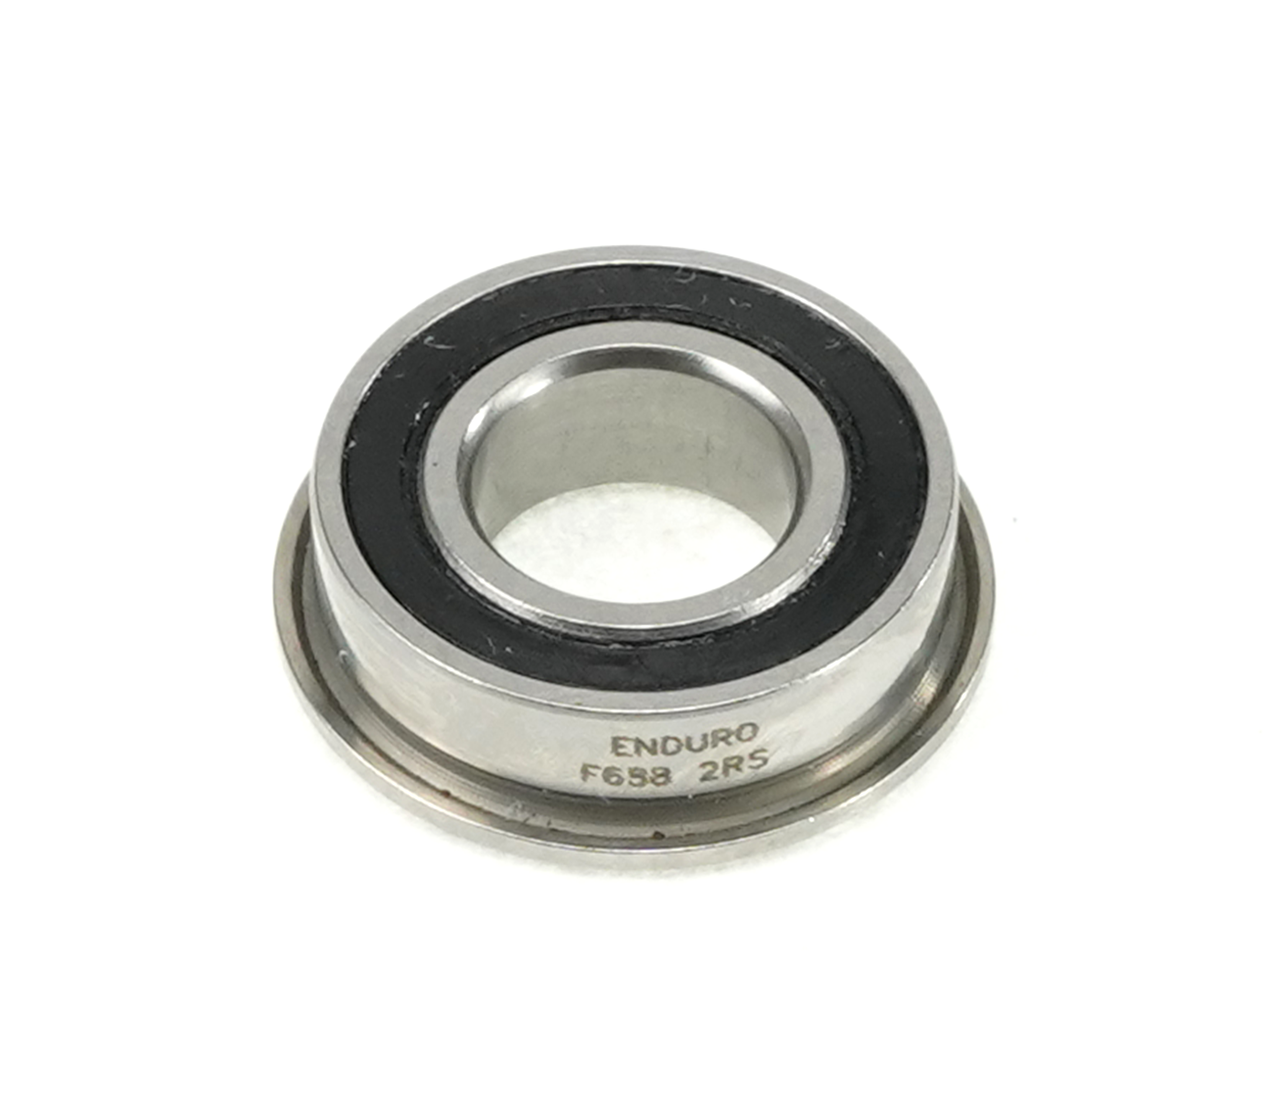 Enduro F688 2RS - ABEC-3, Extended Race, Radial Bearing (C3 Clearance) - 8mm x 16/18mm x 5mm